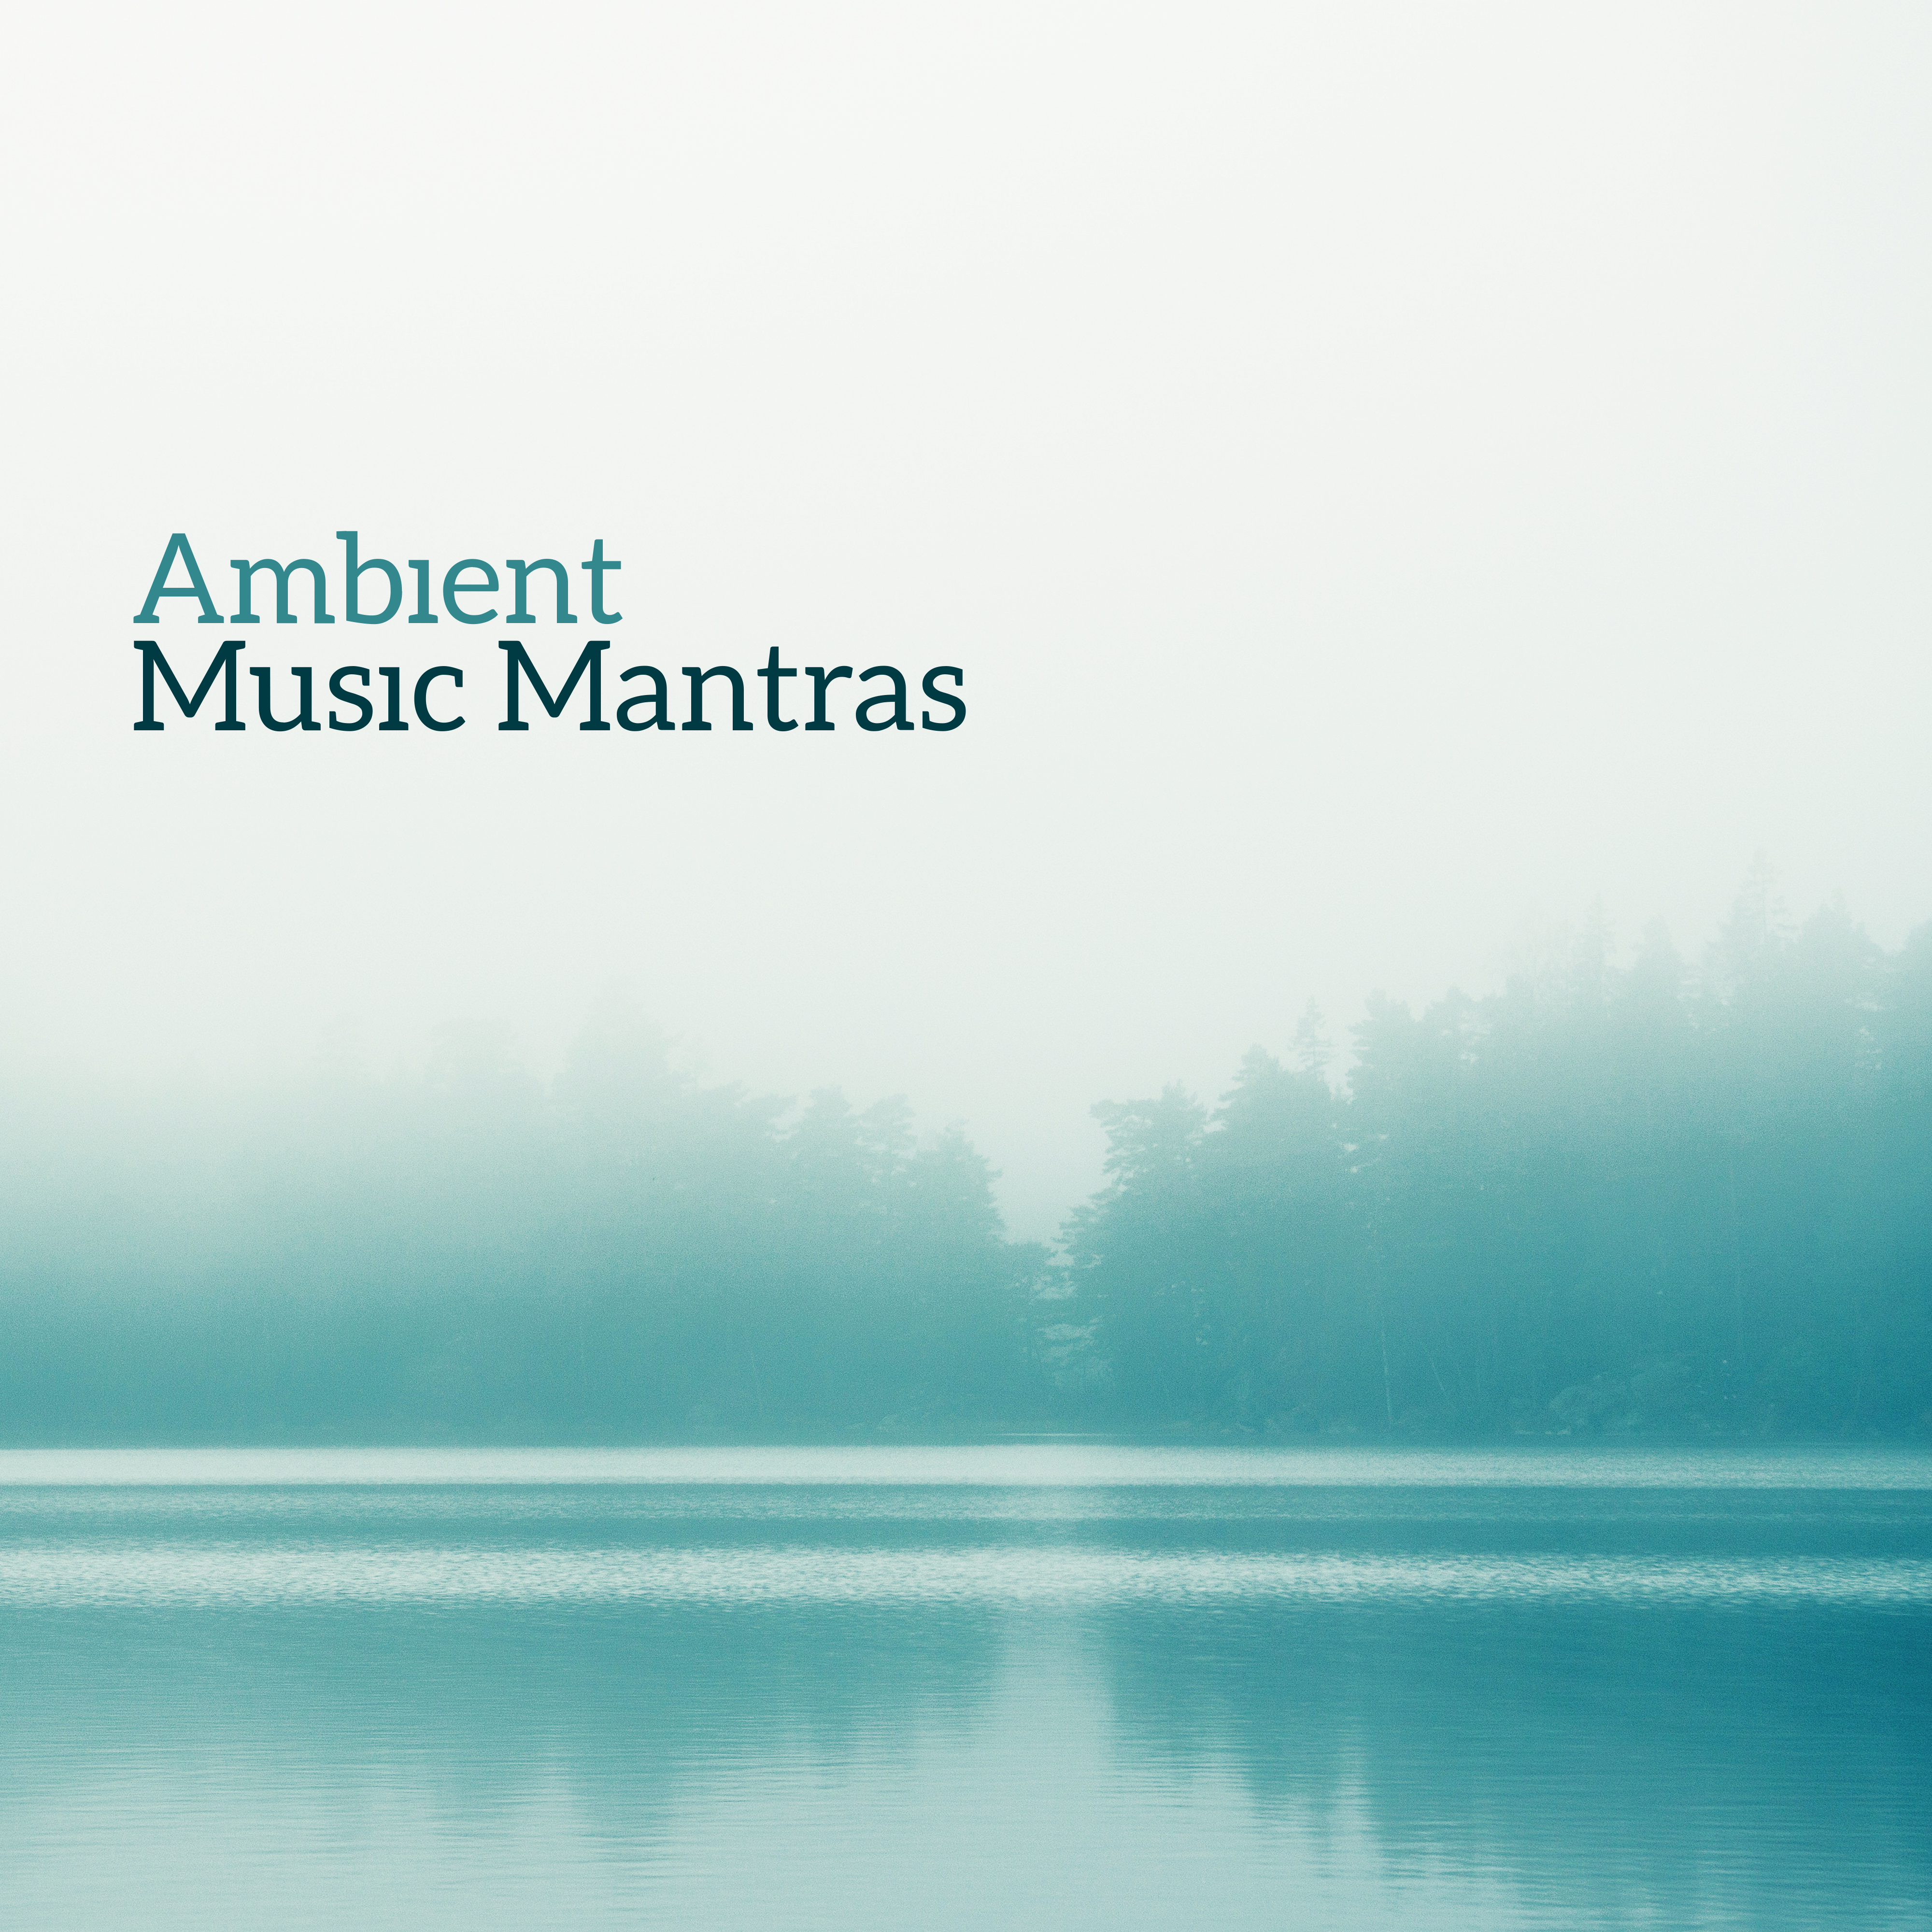 Ambient Music Mantras